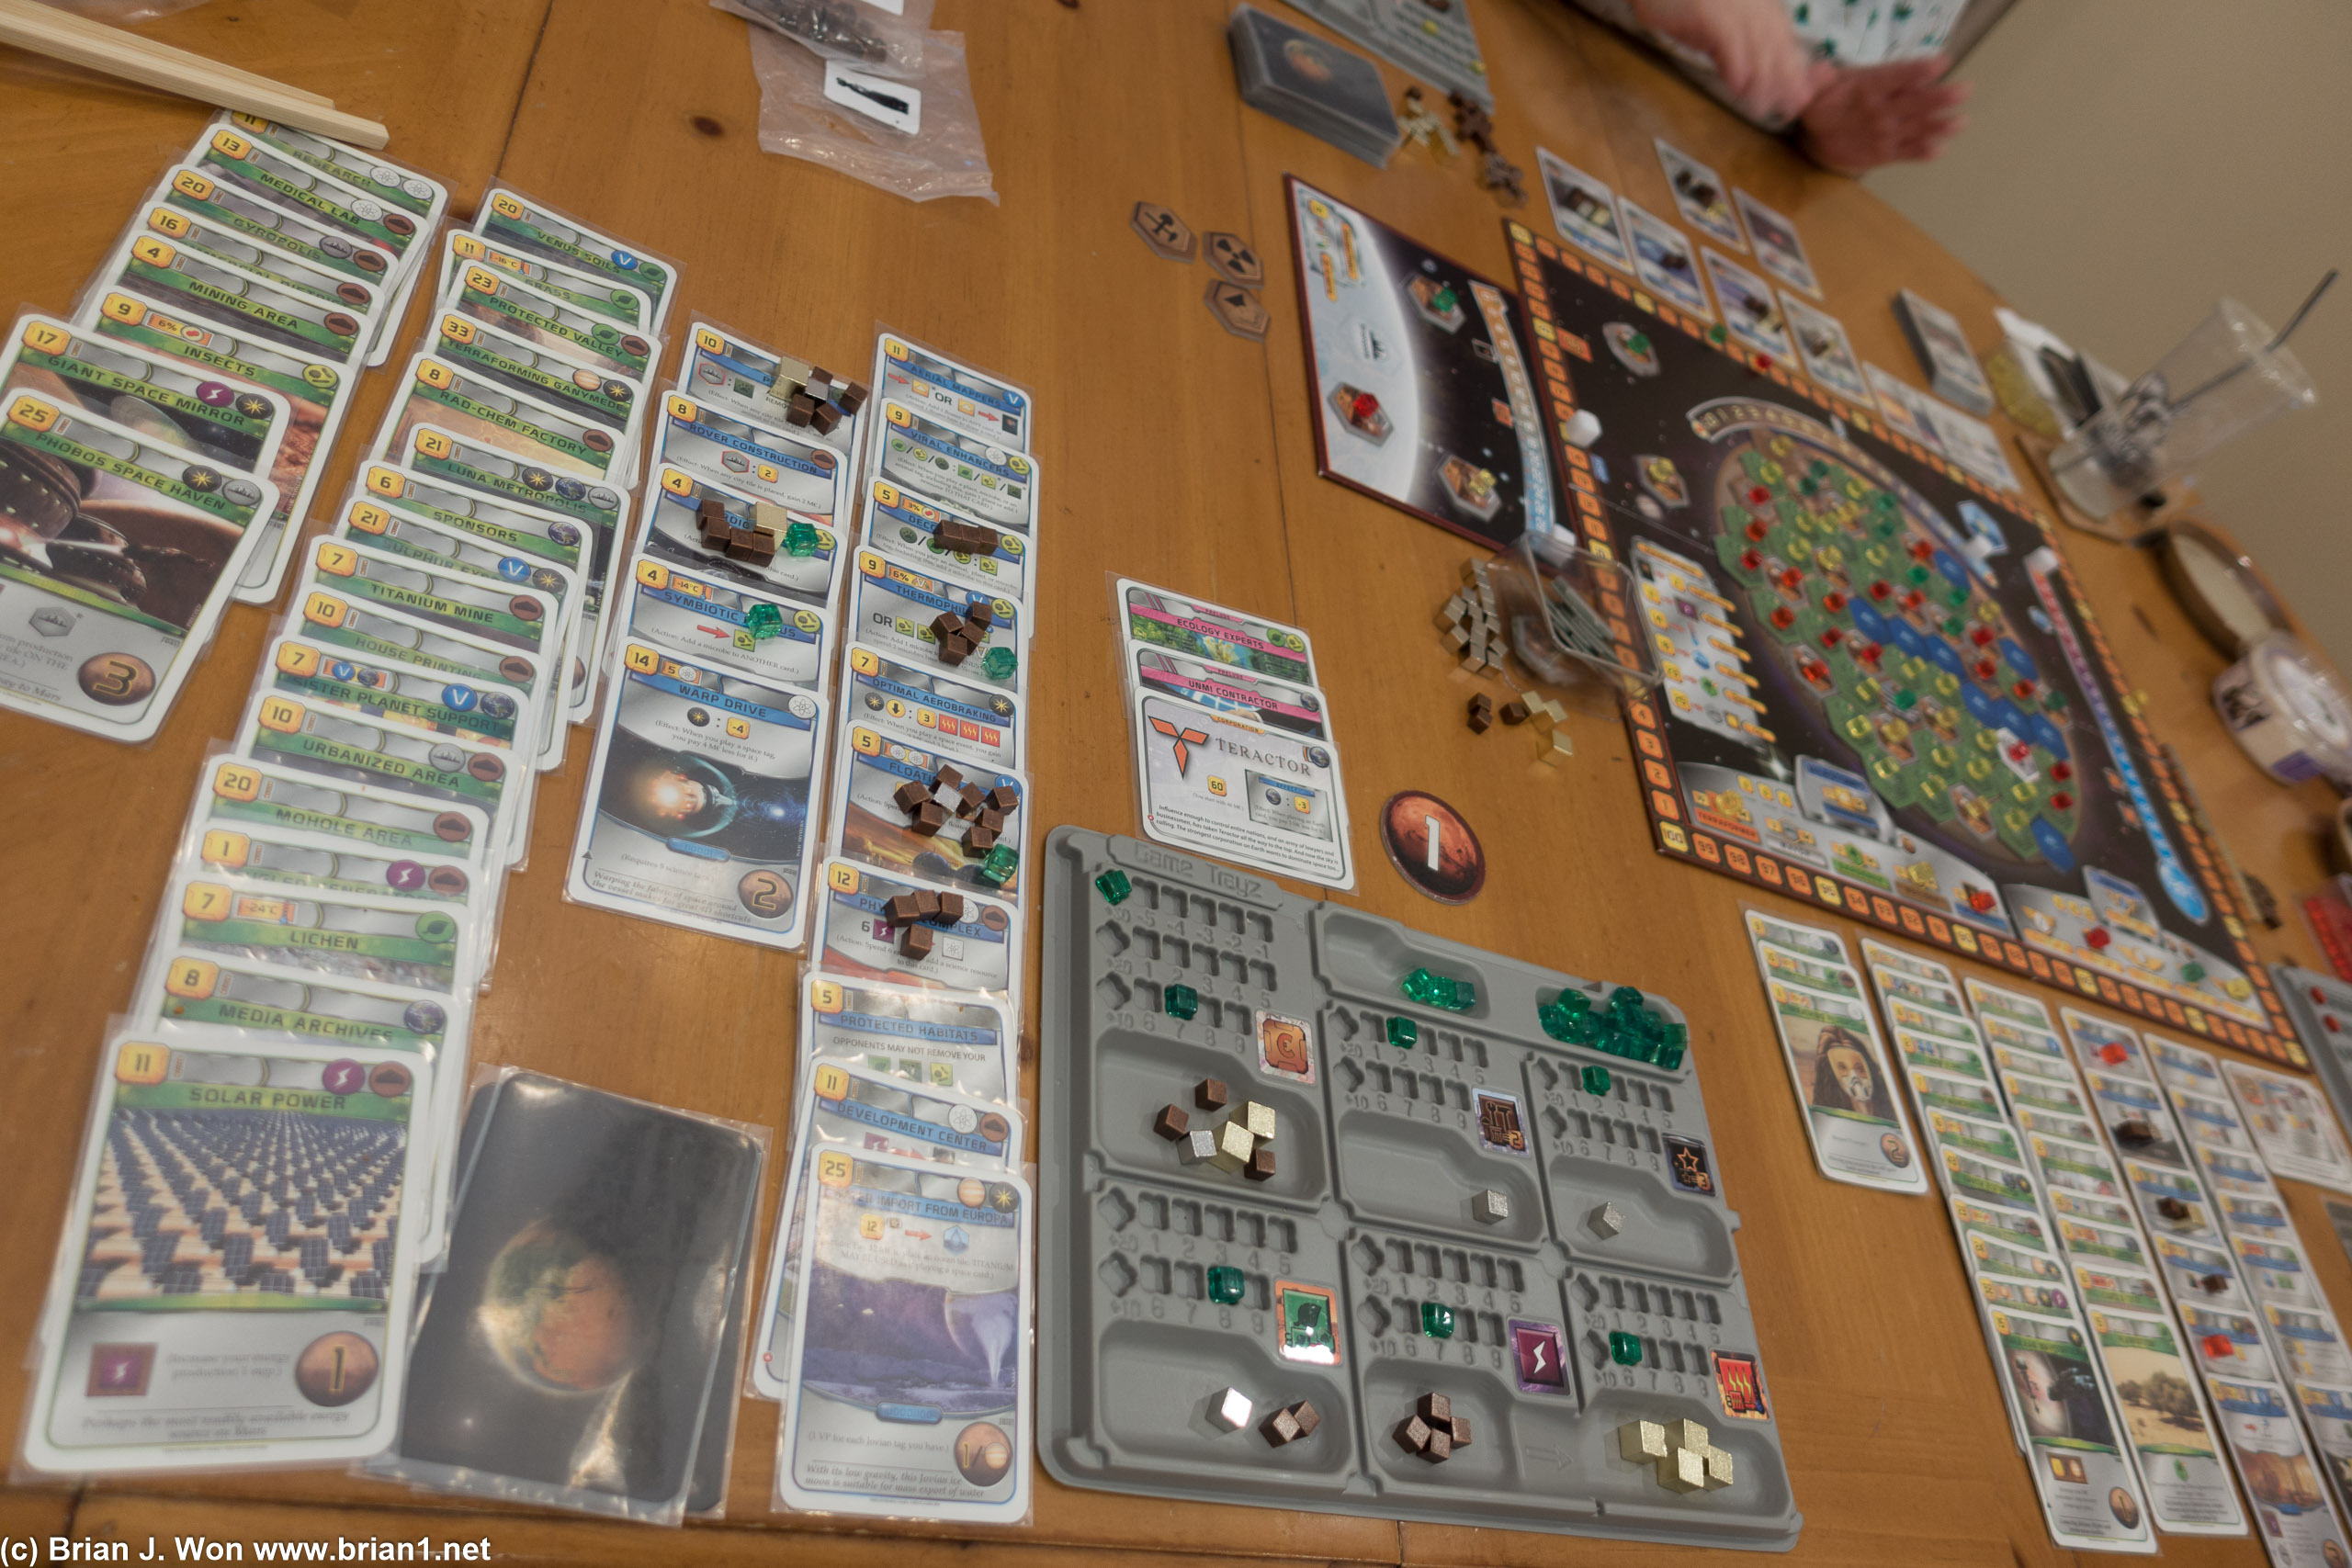 Getting owned by Sue at Terraforming Mars. She had almost 200 points!